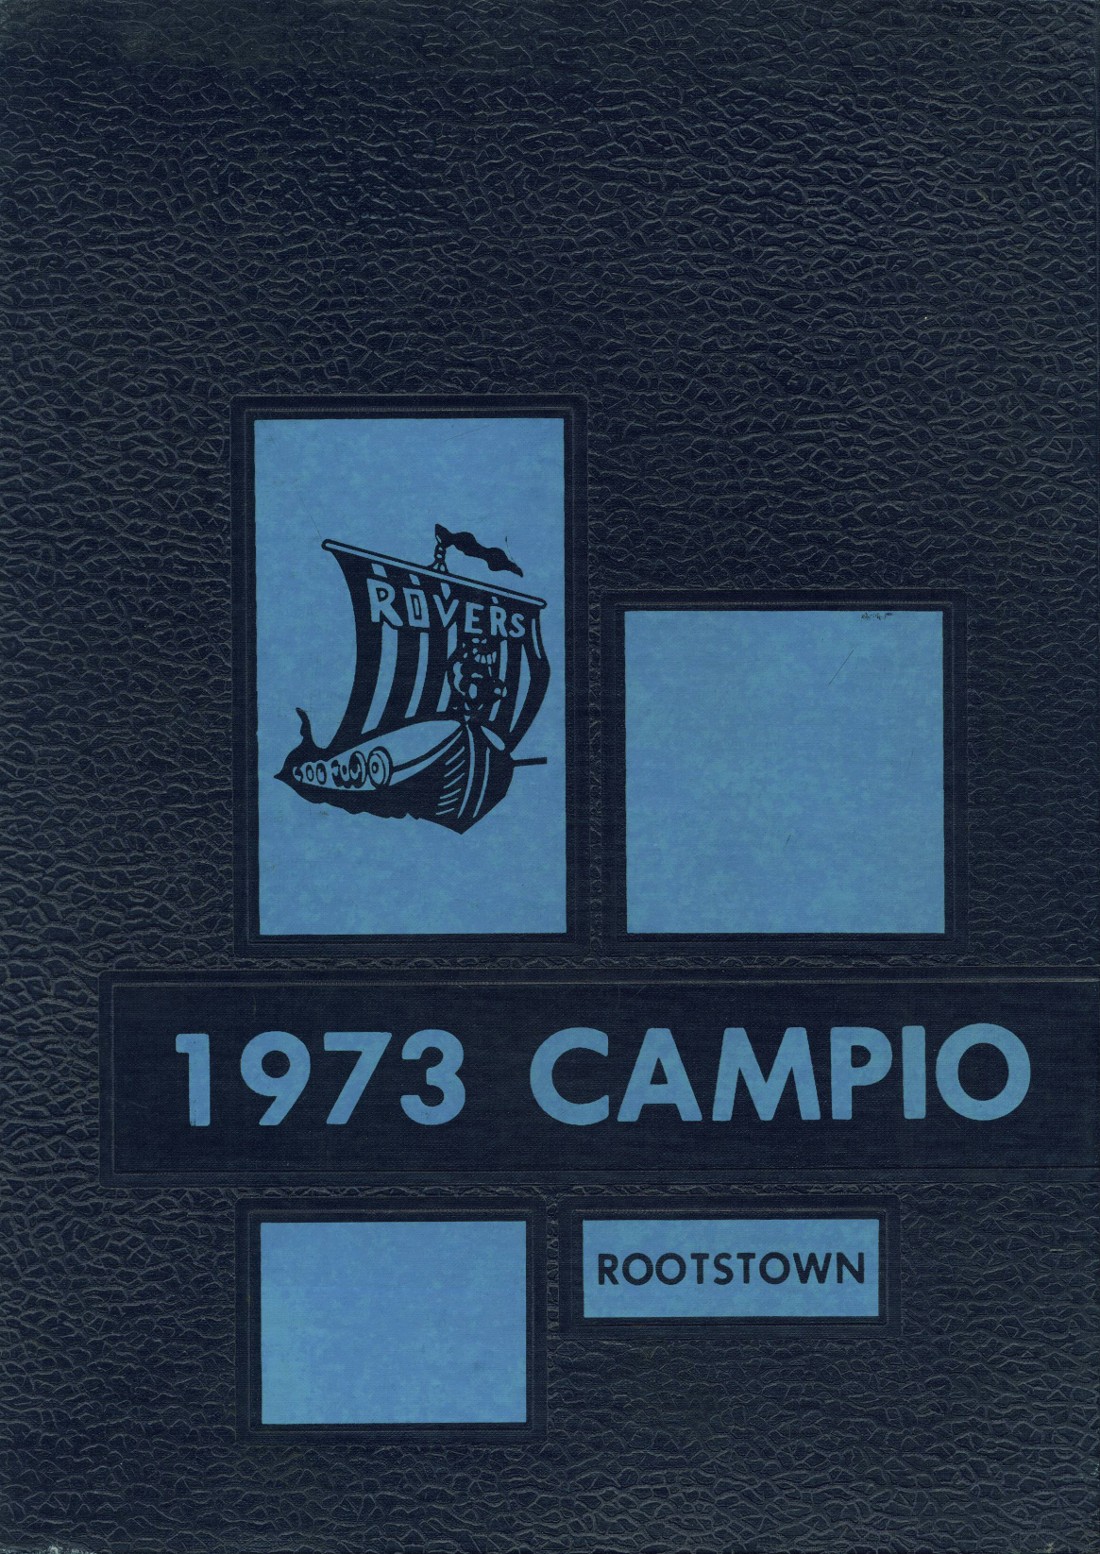 1973 yearbook from Rootstown High School from Rootstown, Ohio for sale